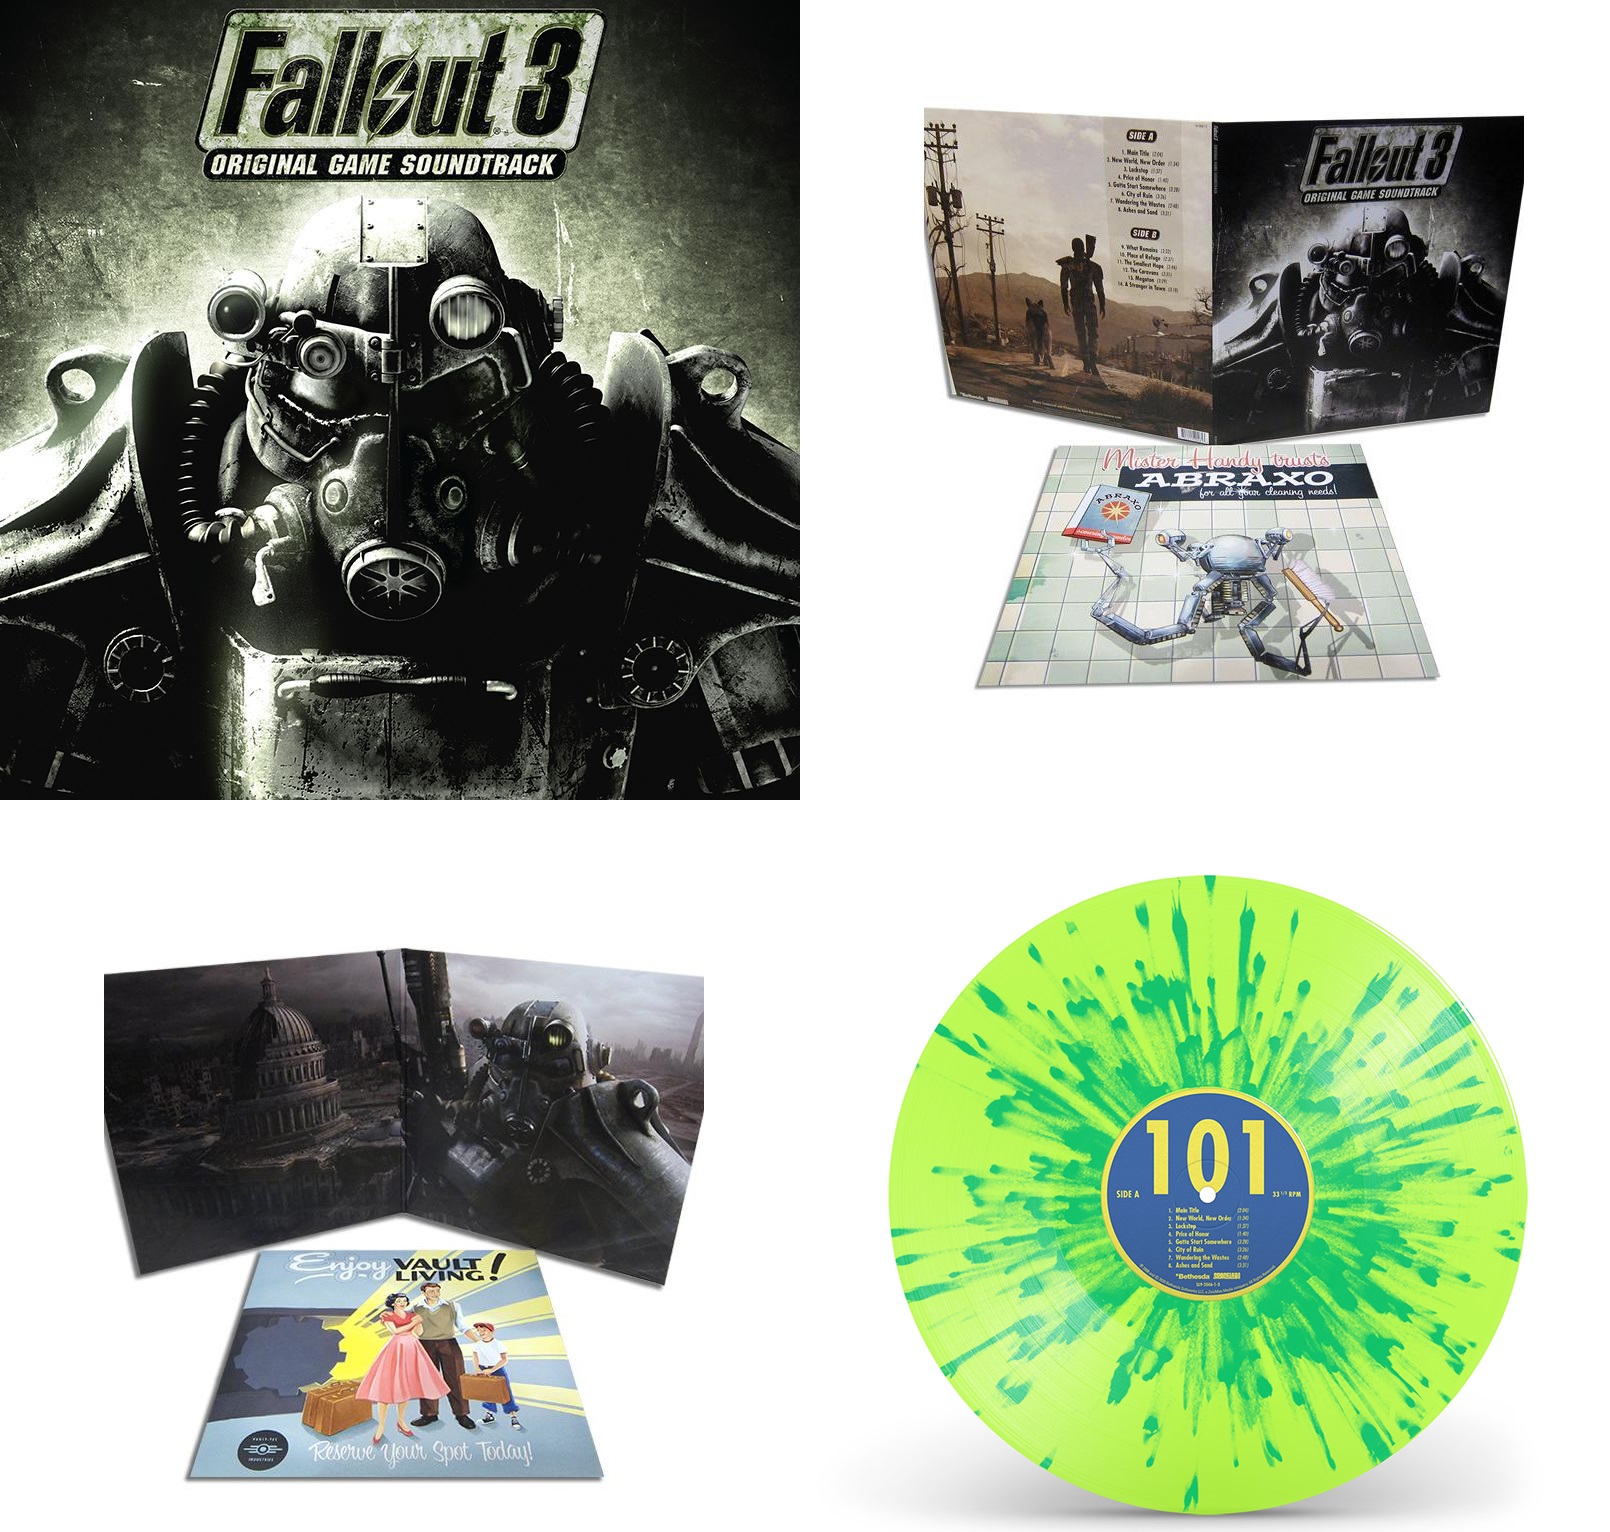 Fallout 3 (Original Game Soundtrack Isotope 239)